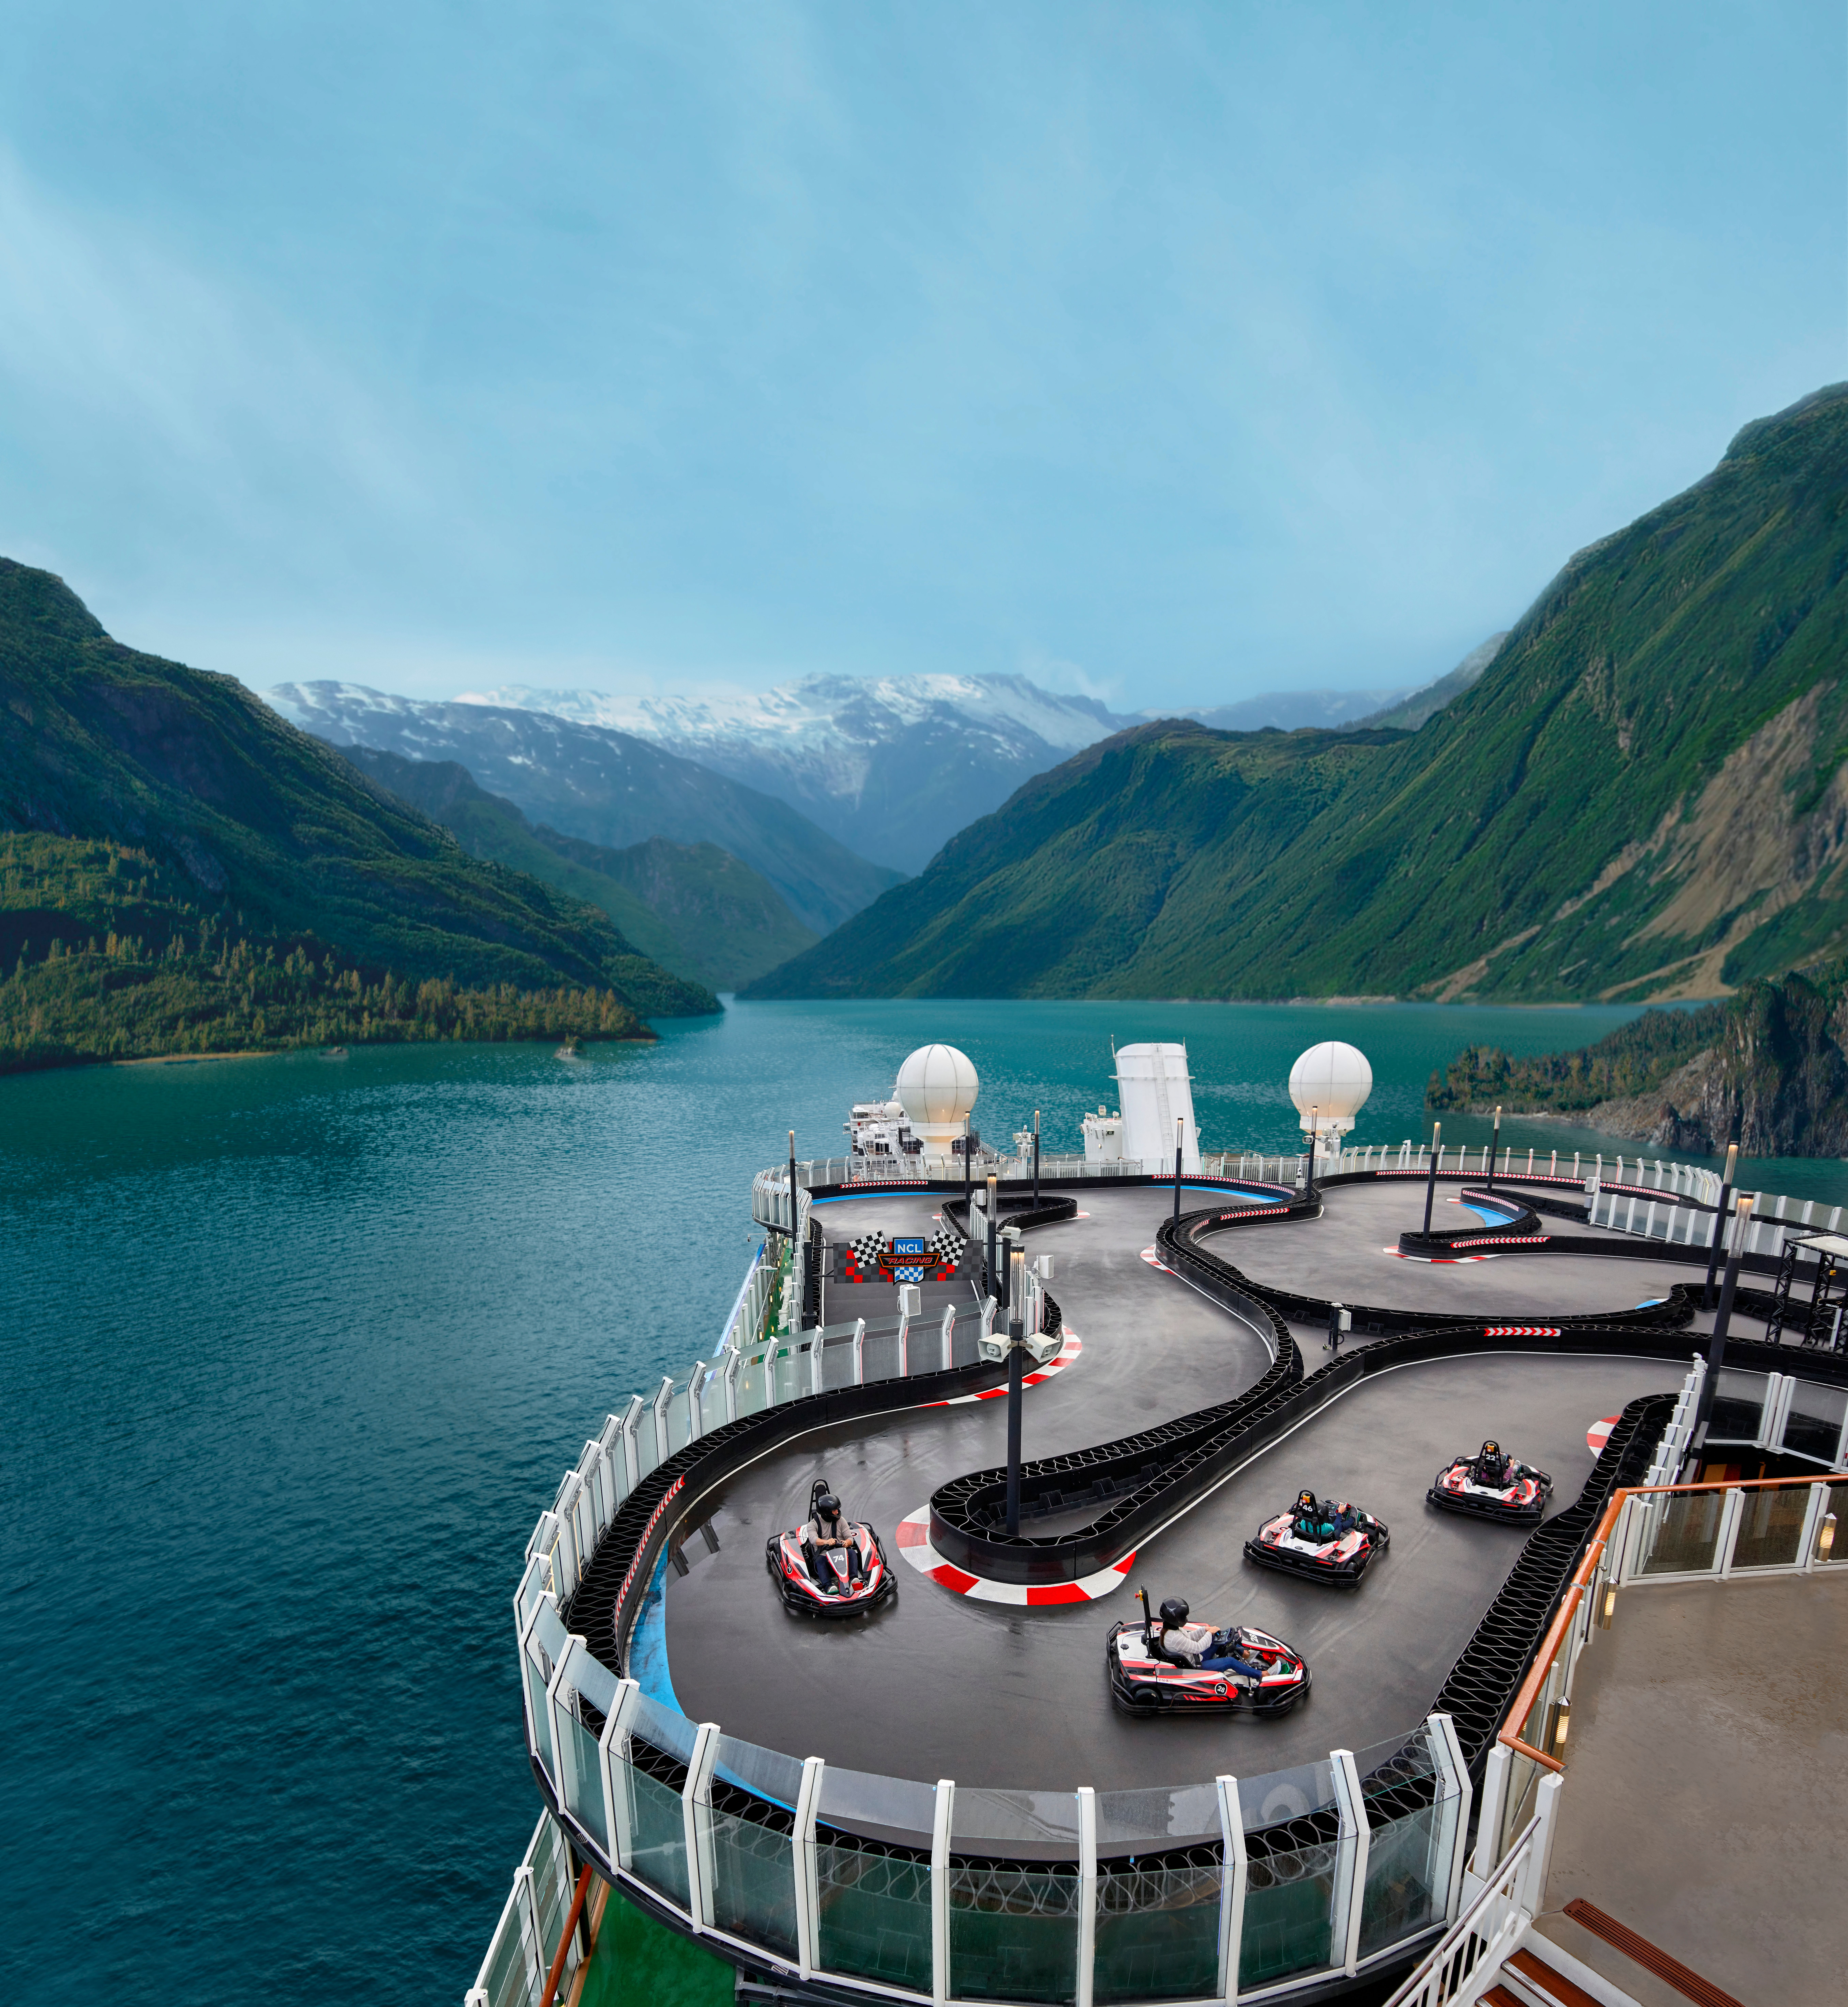 Go-kart track on cruise ship deck with scenic Alaskan fjord views.